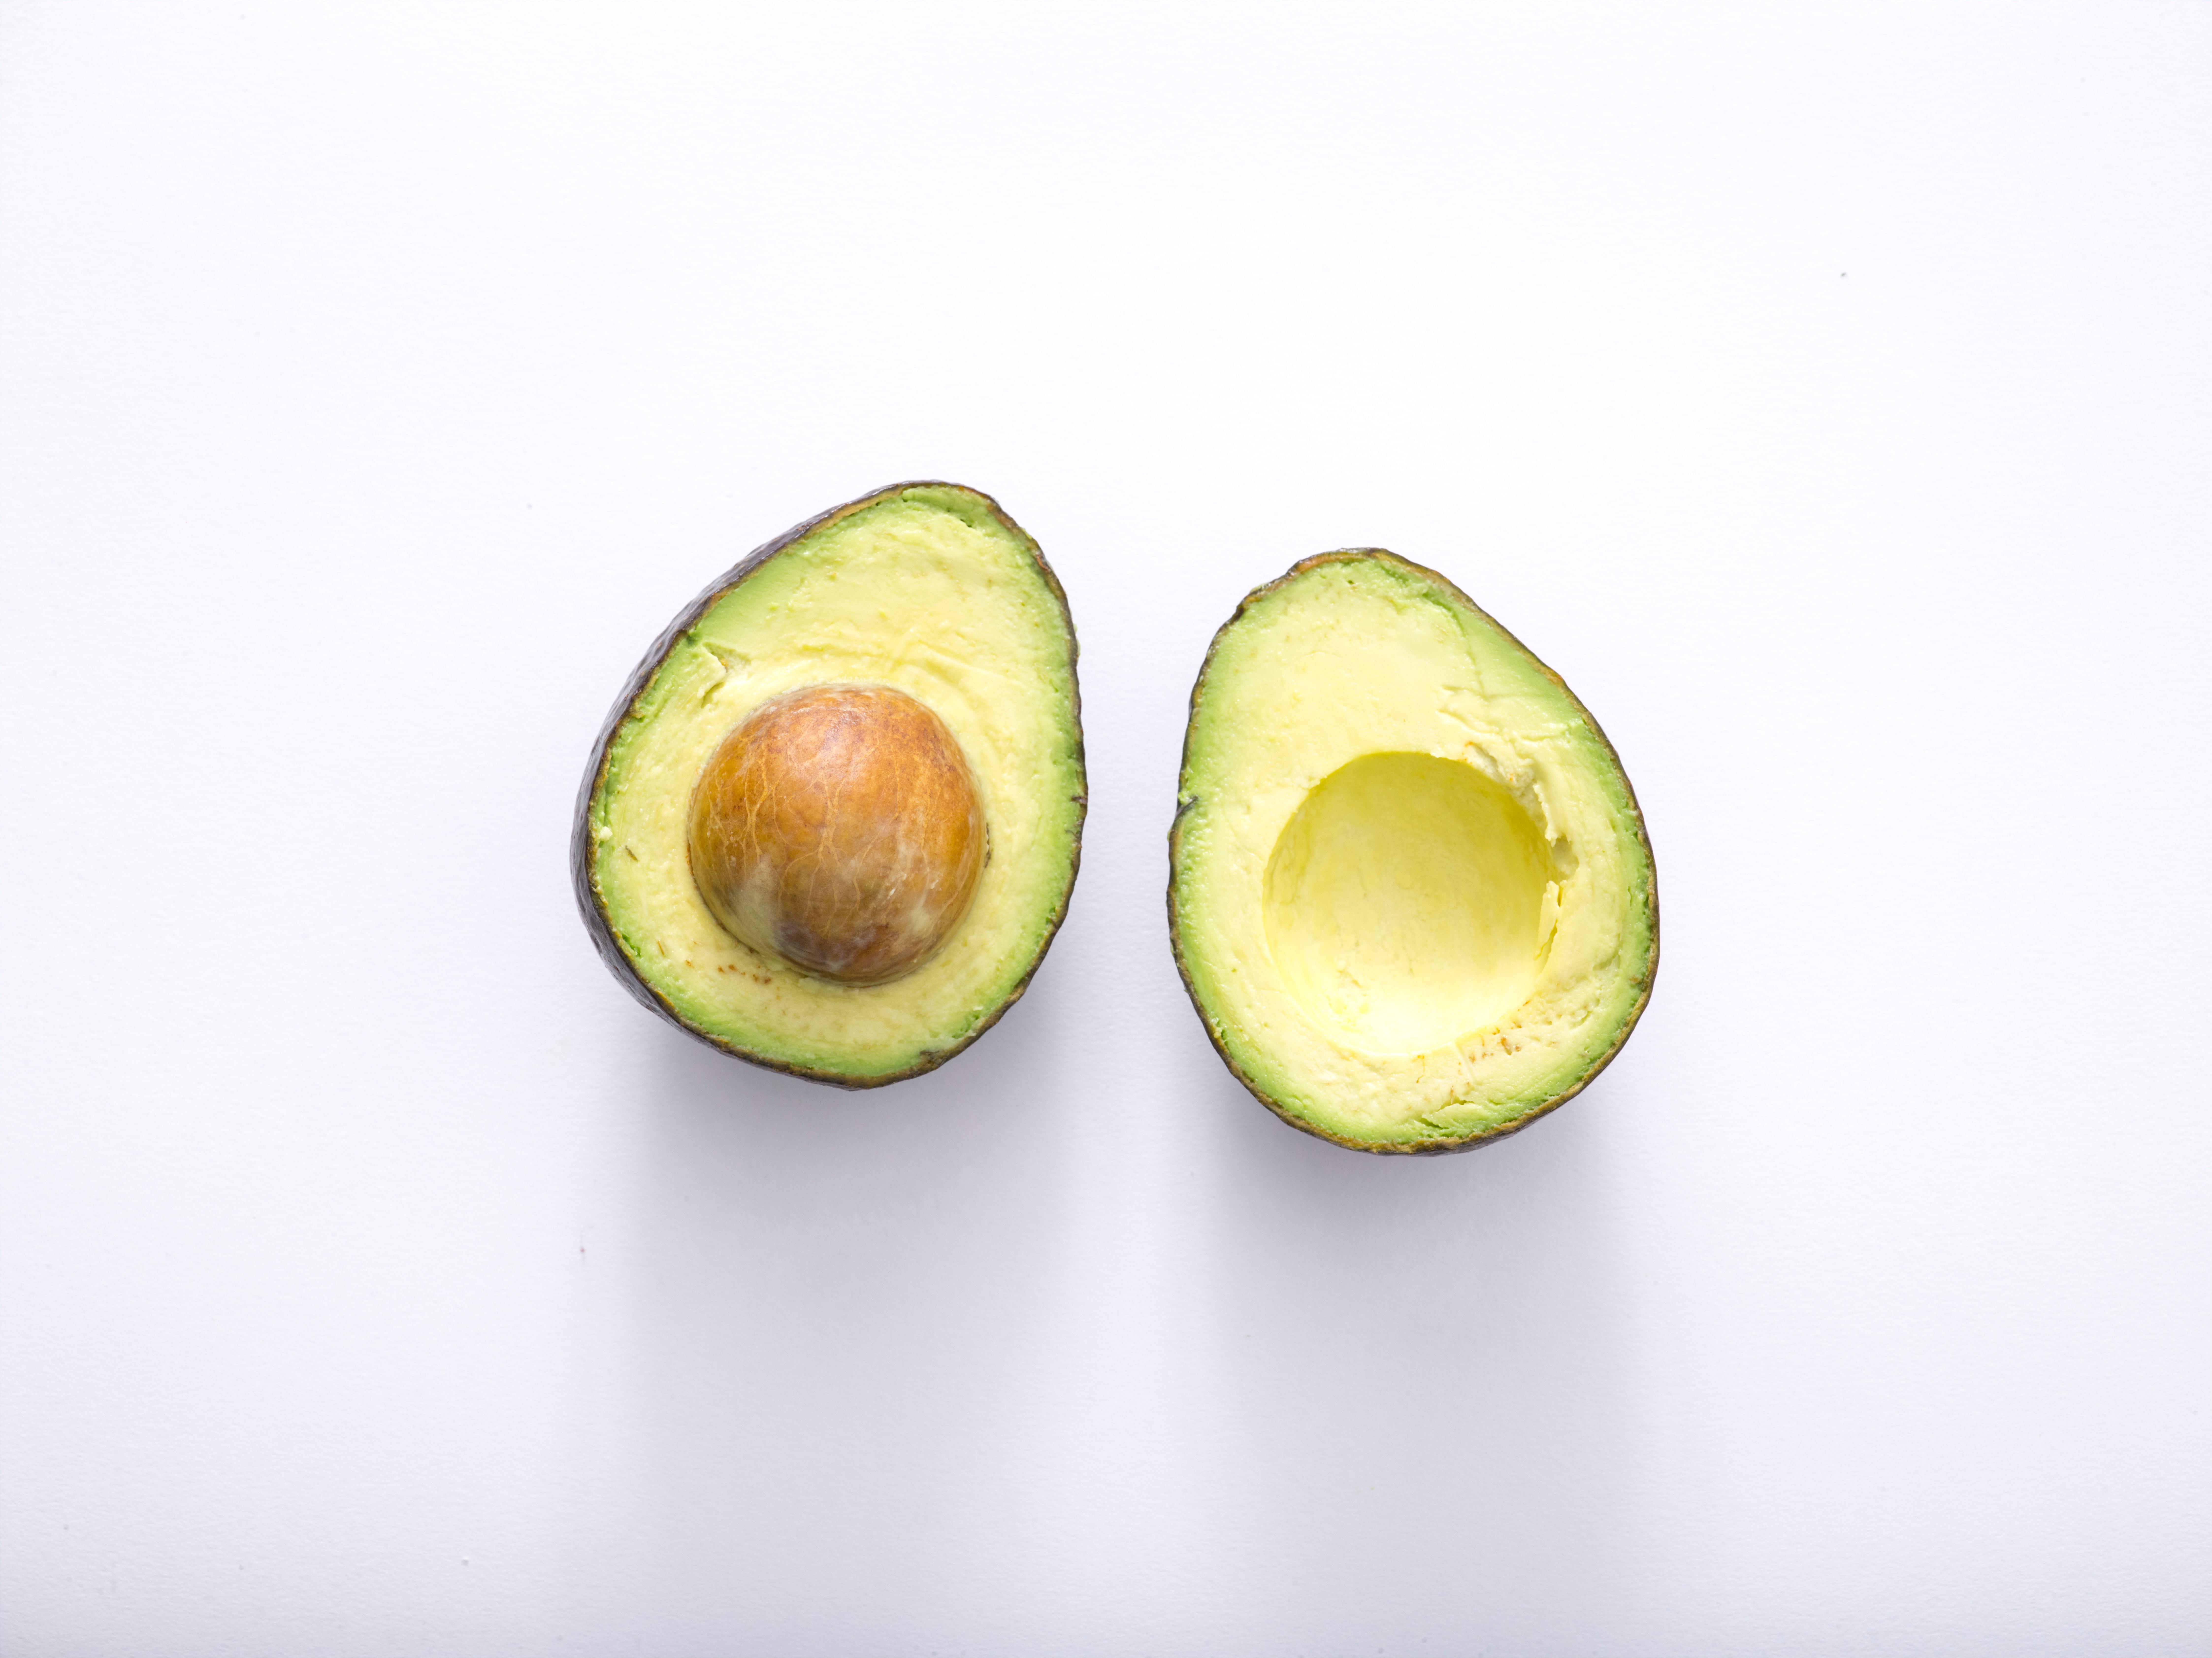 Two halves of a small Haas avocado appear side by side, skin side down, on a white background. The left avocado still has the pit.